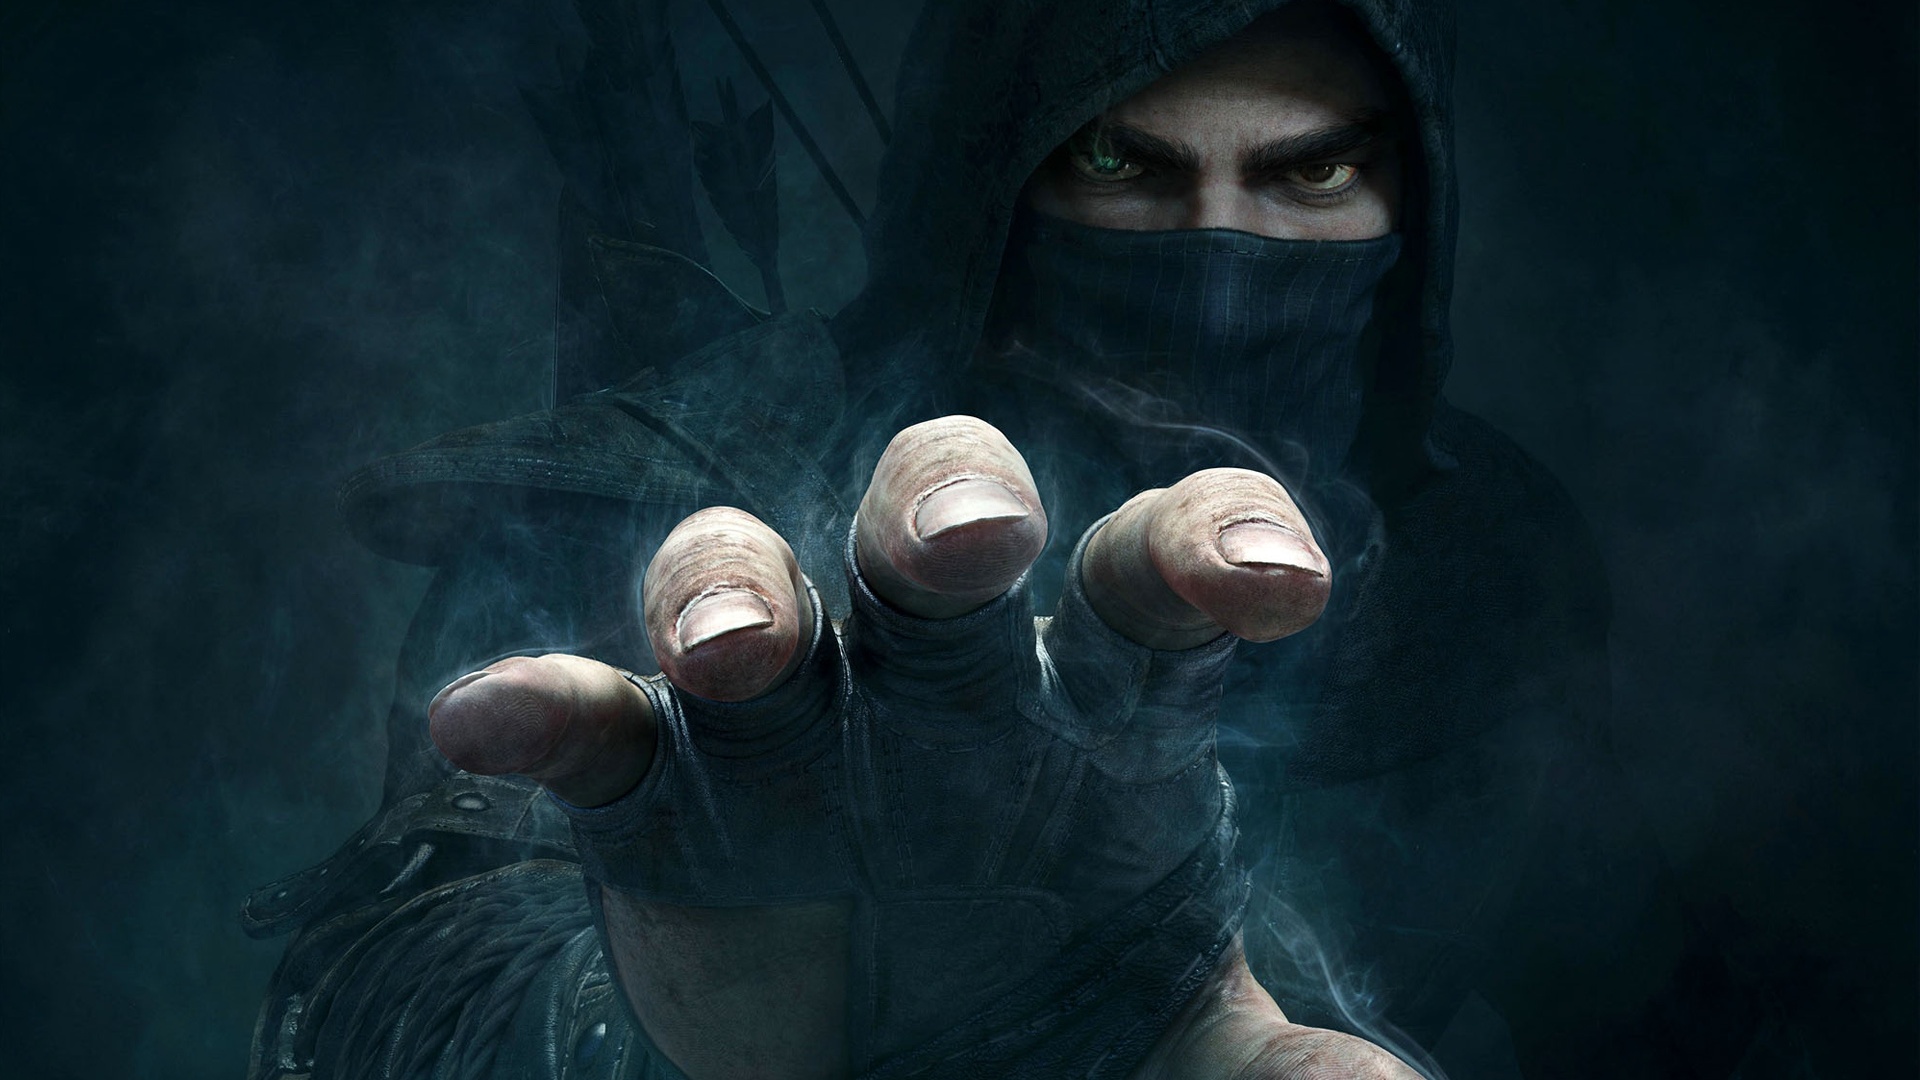 Thief Wallpaper HD Background Image